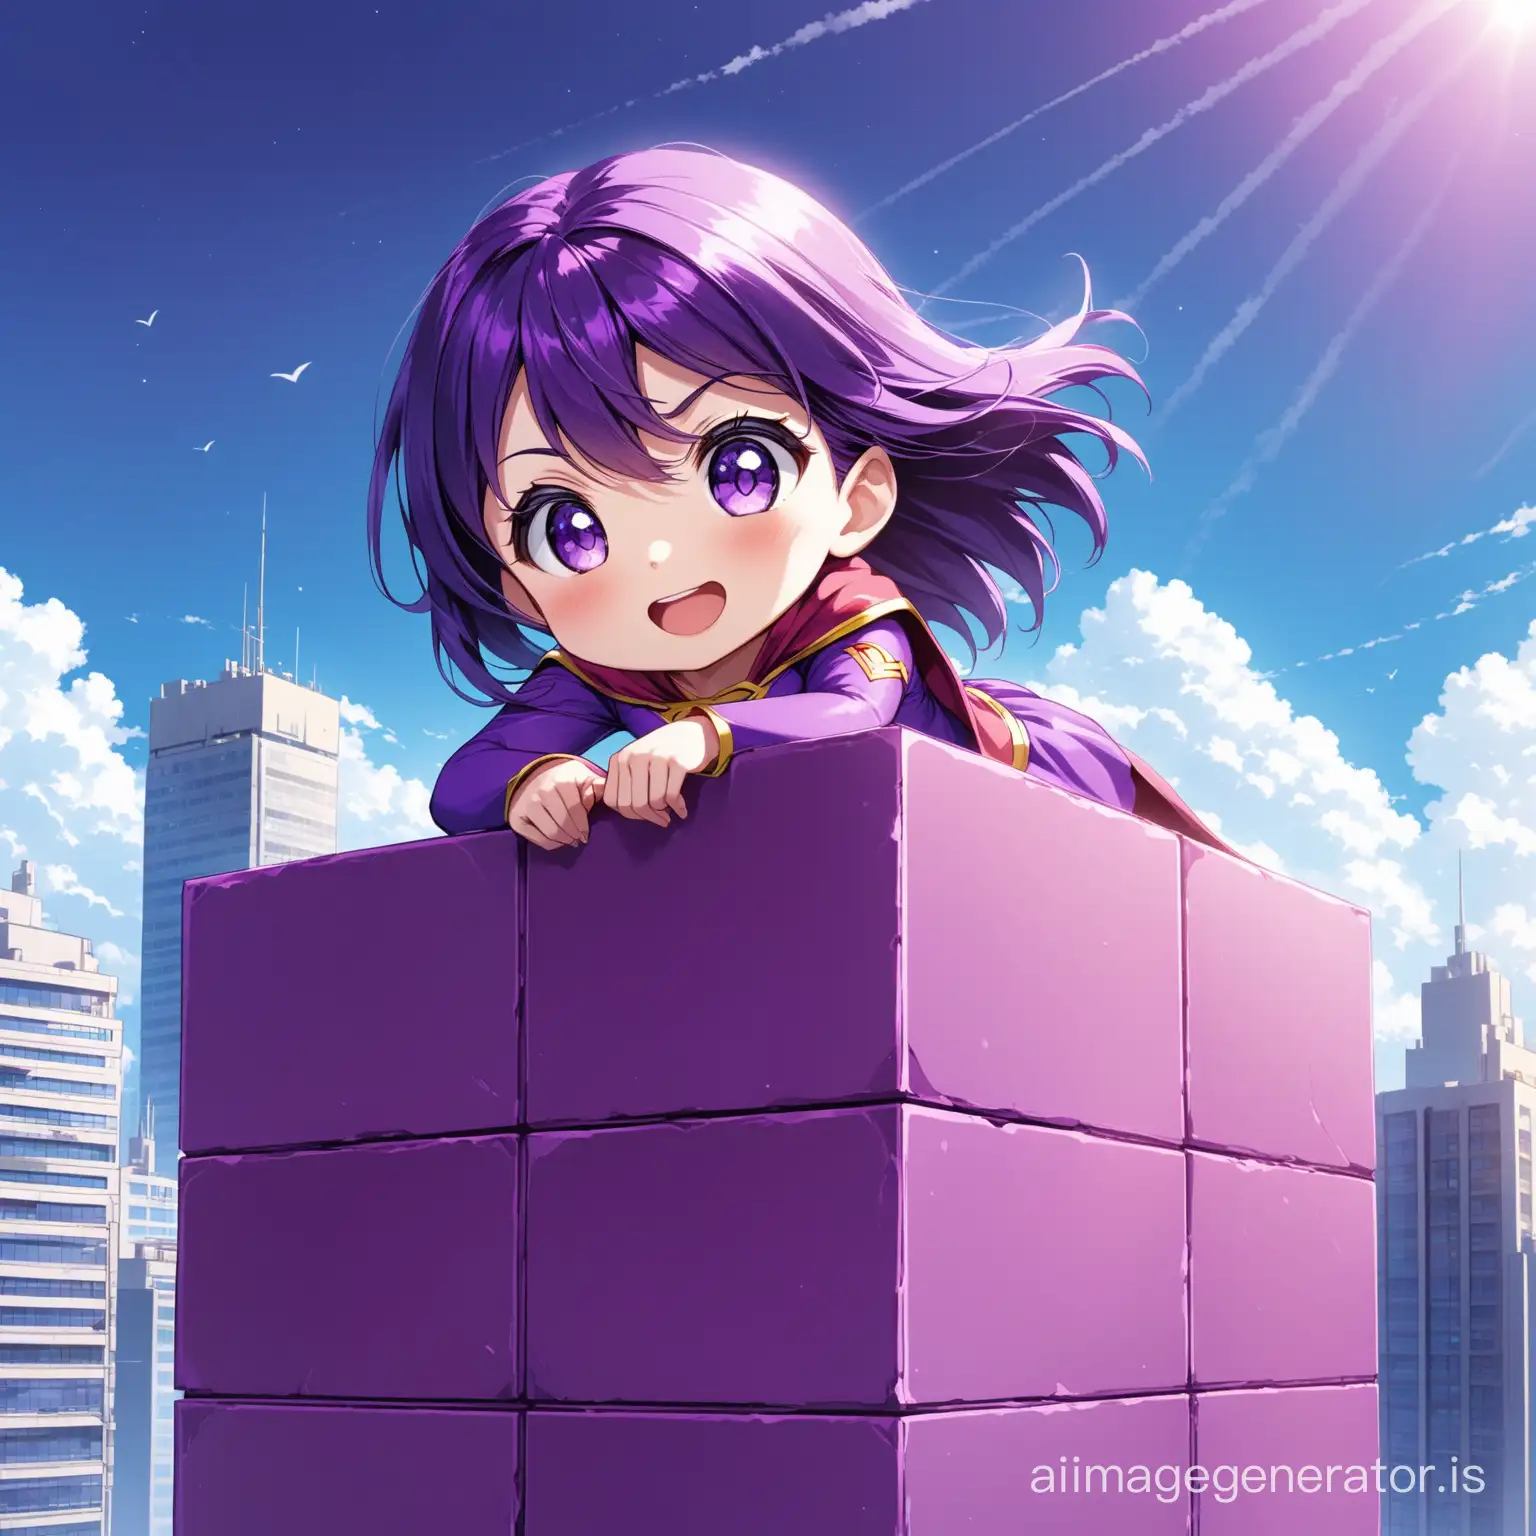 Purple-Block-Super-Girl-Surveying-Cityscape-from-Atop-Building